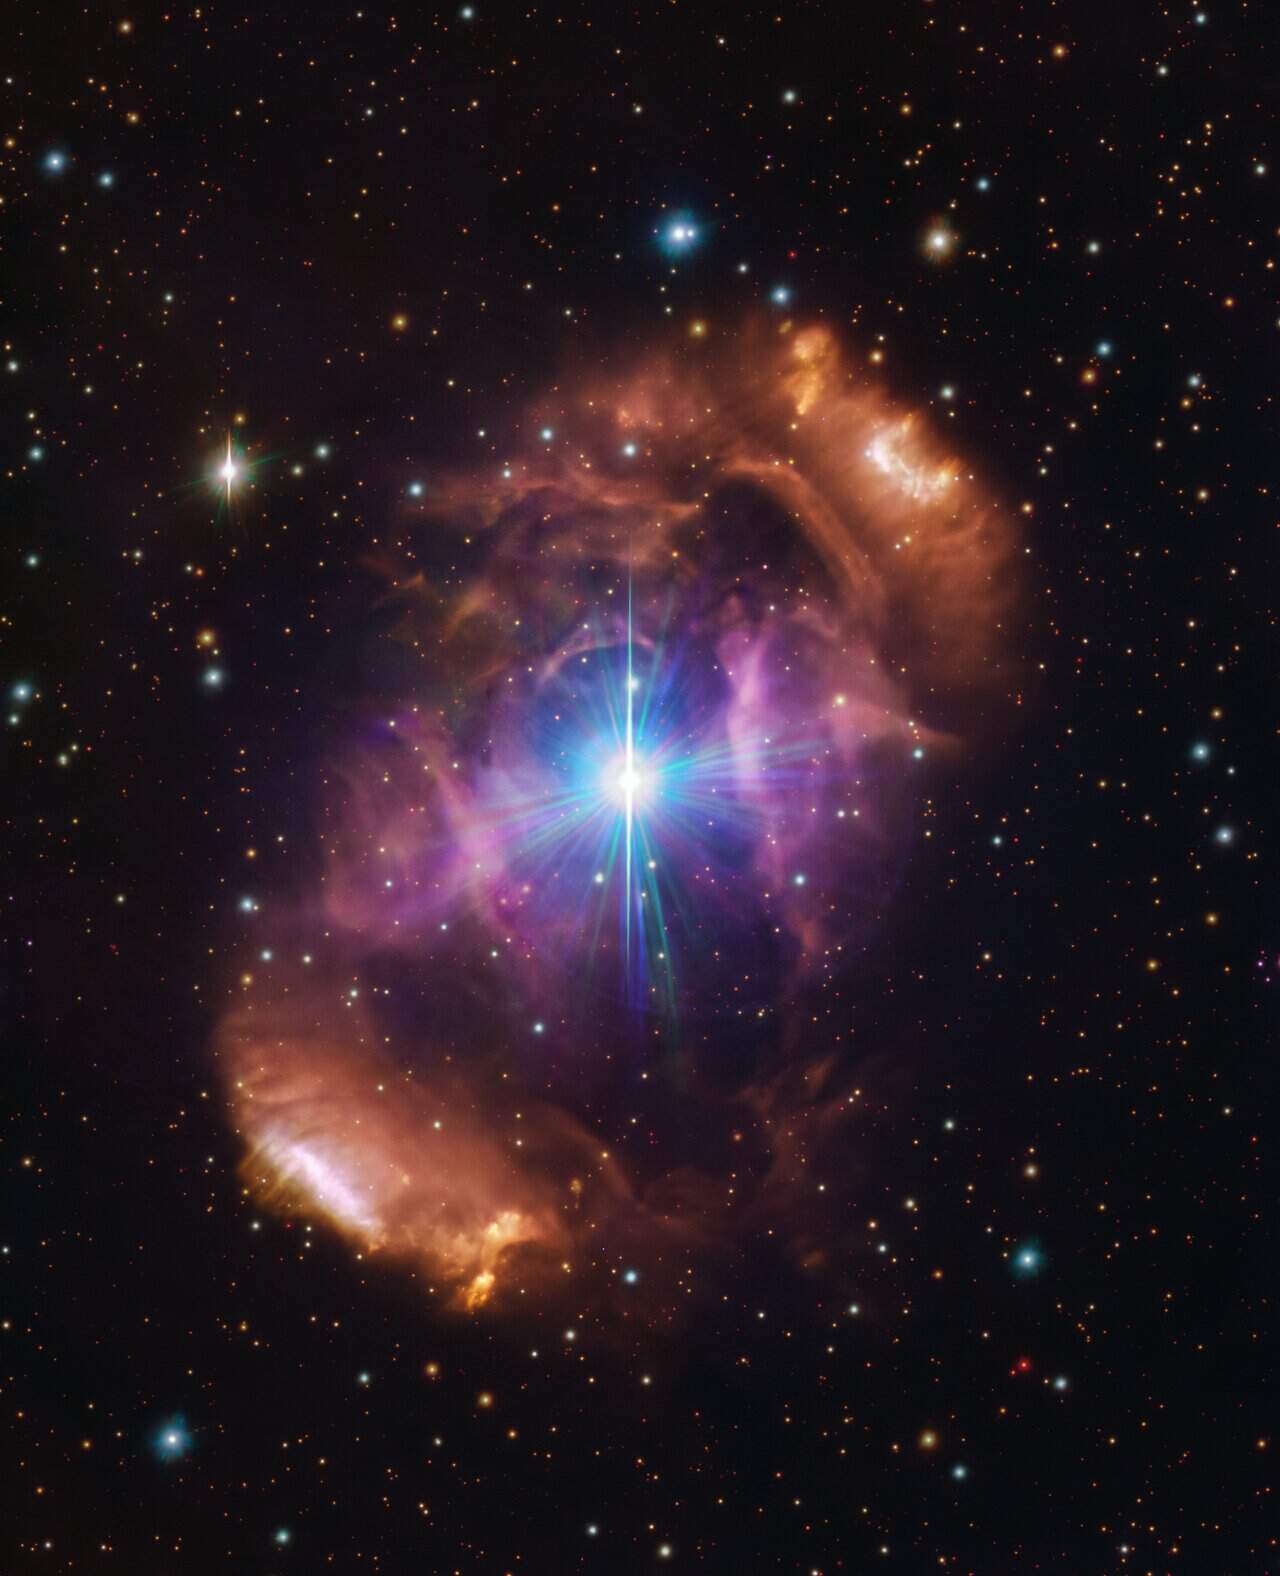 Real image of nebula NGC 6164/6165 surrounding the star system HD 148937 in visible light